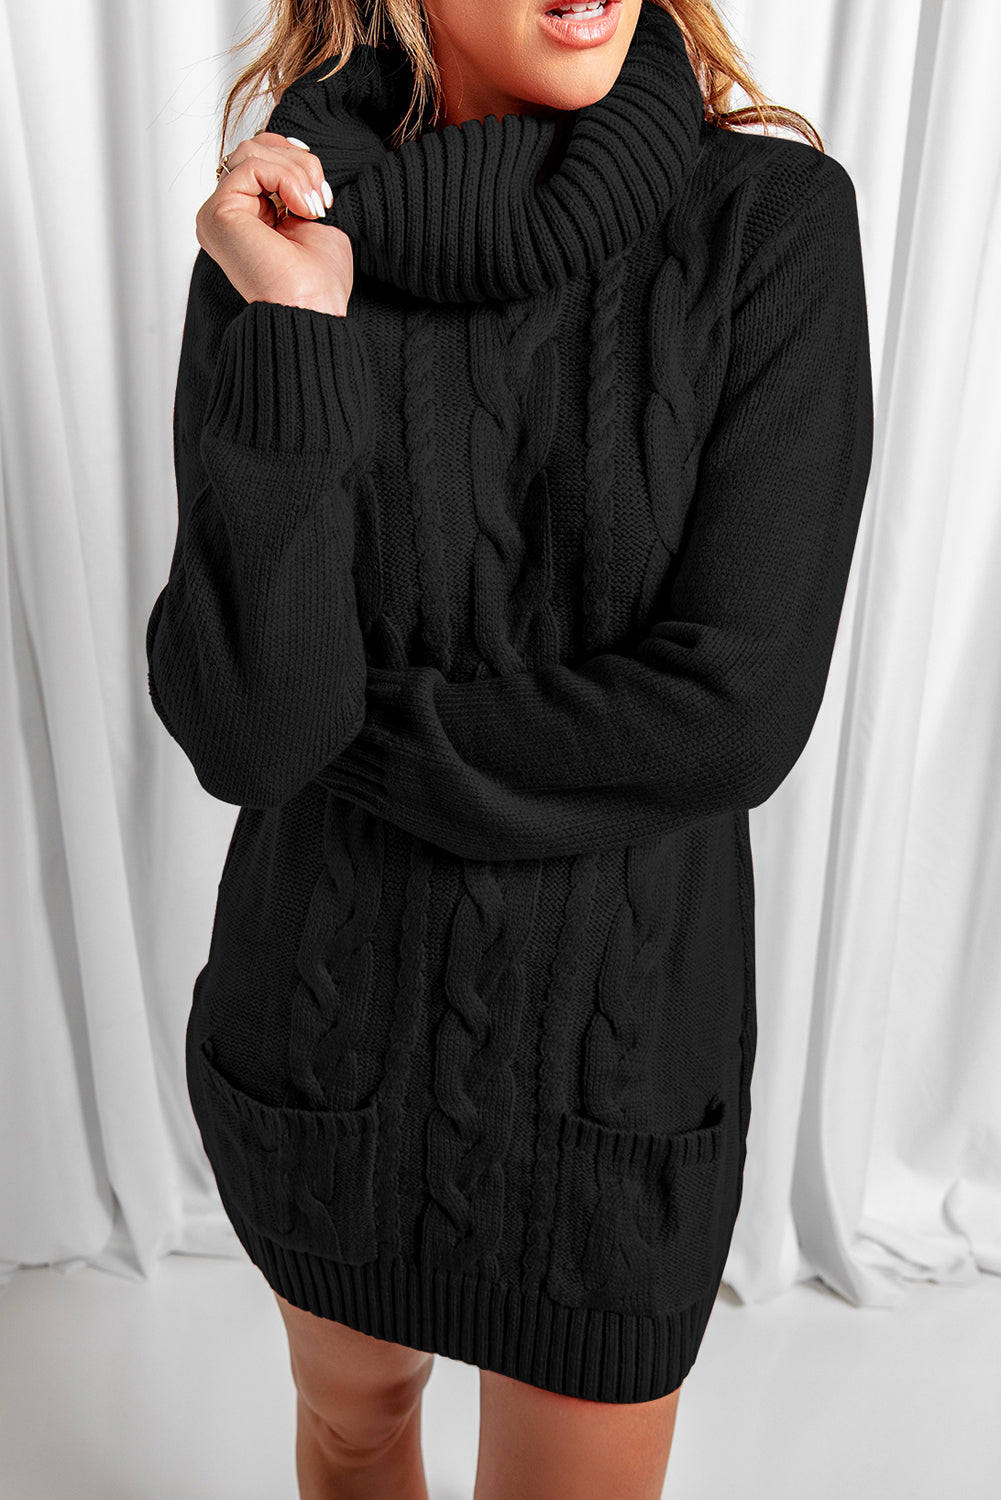 Black Cowl Neck Pockets Cable Knit Sweater Dress